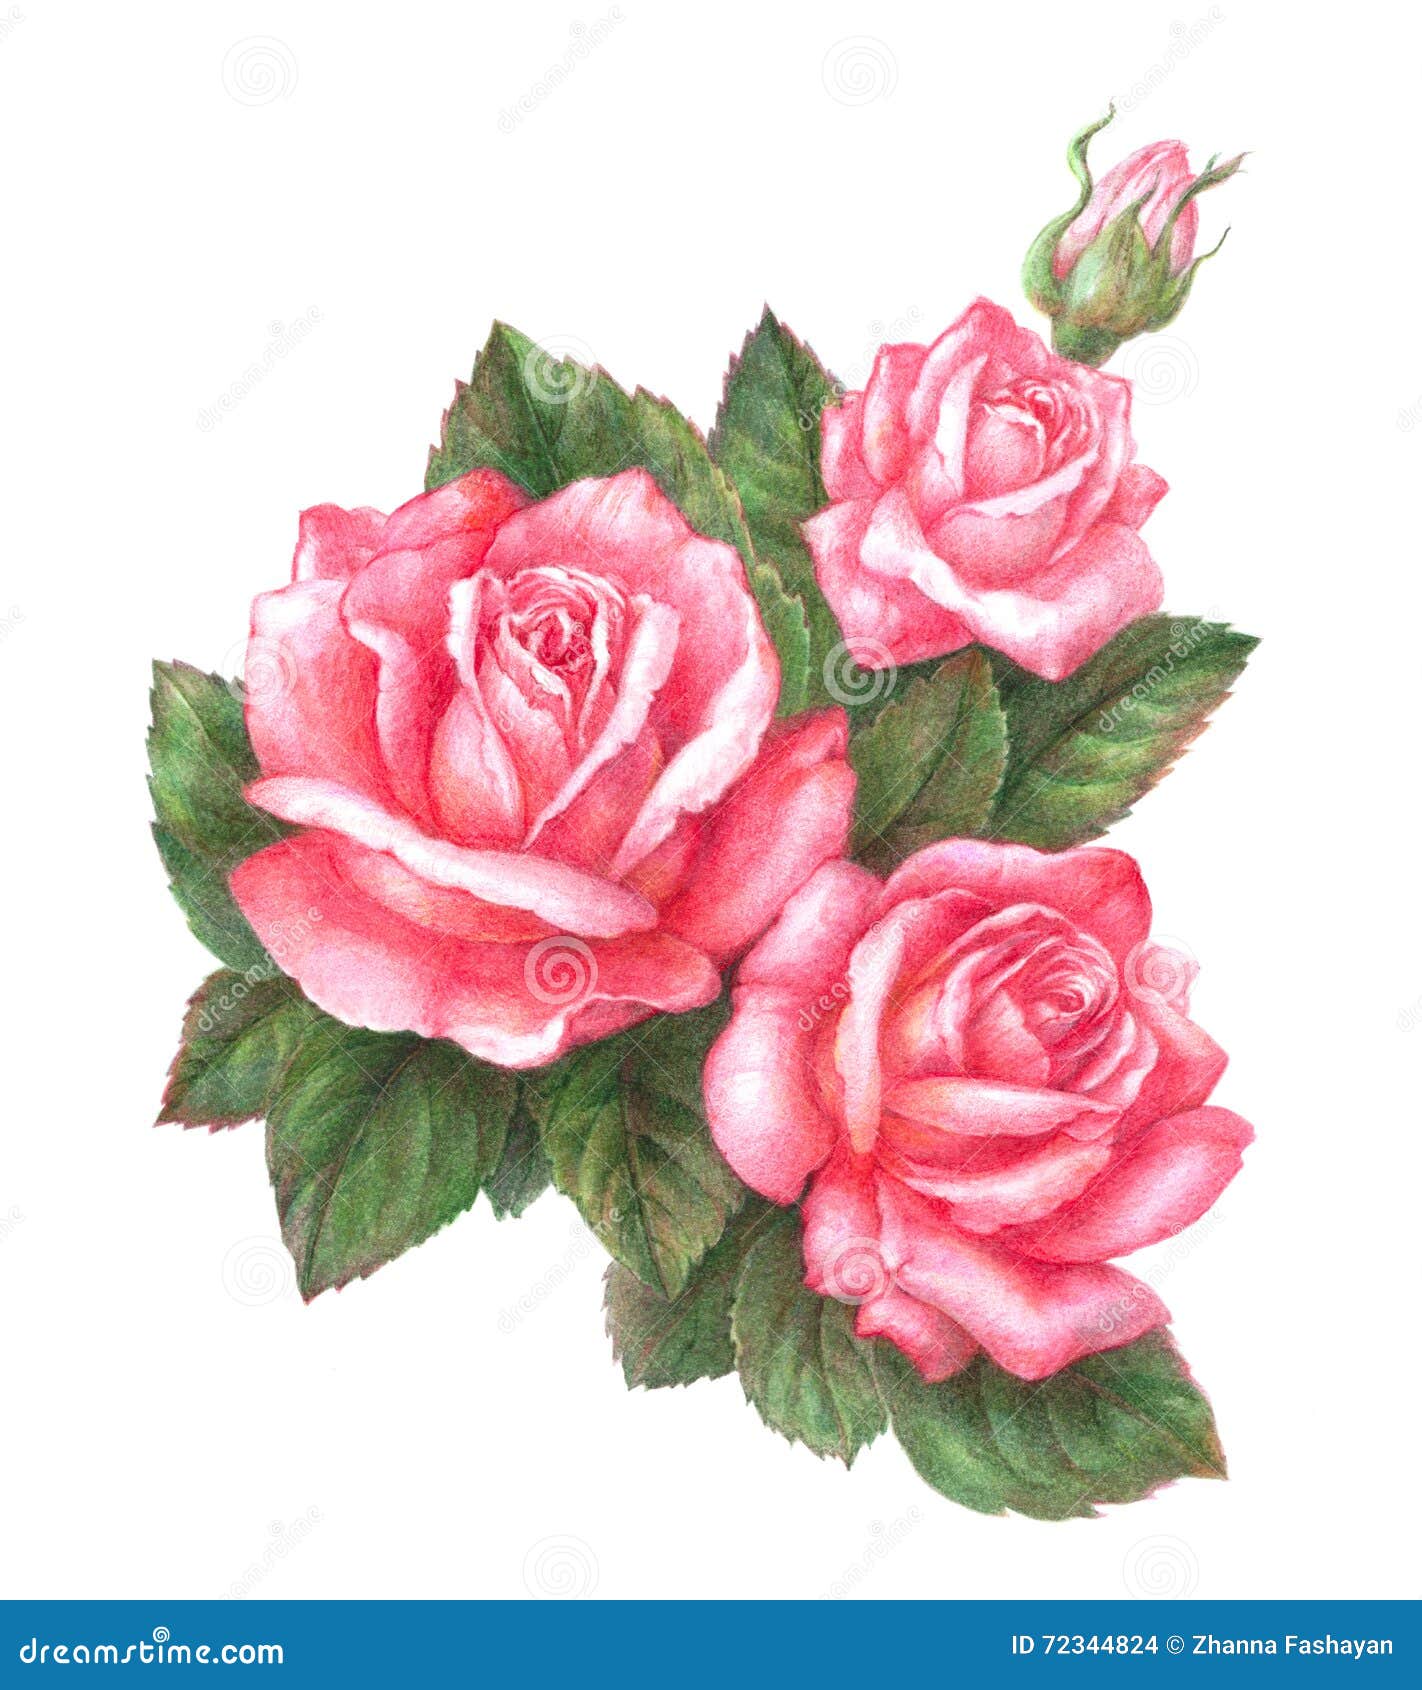 drawn roses in color